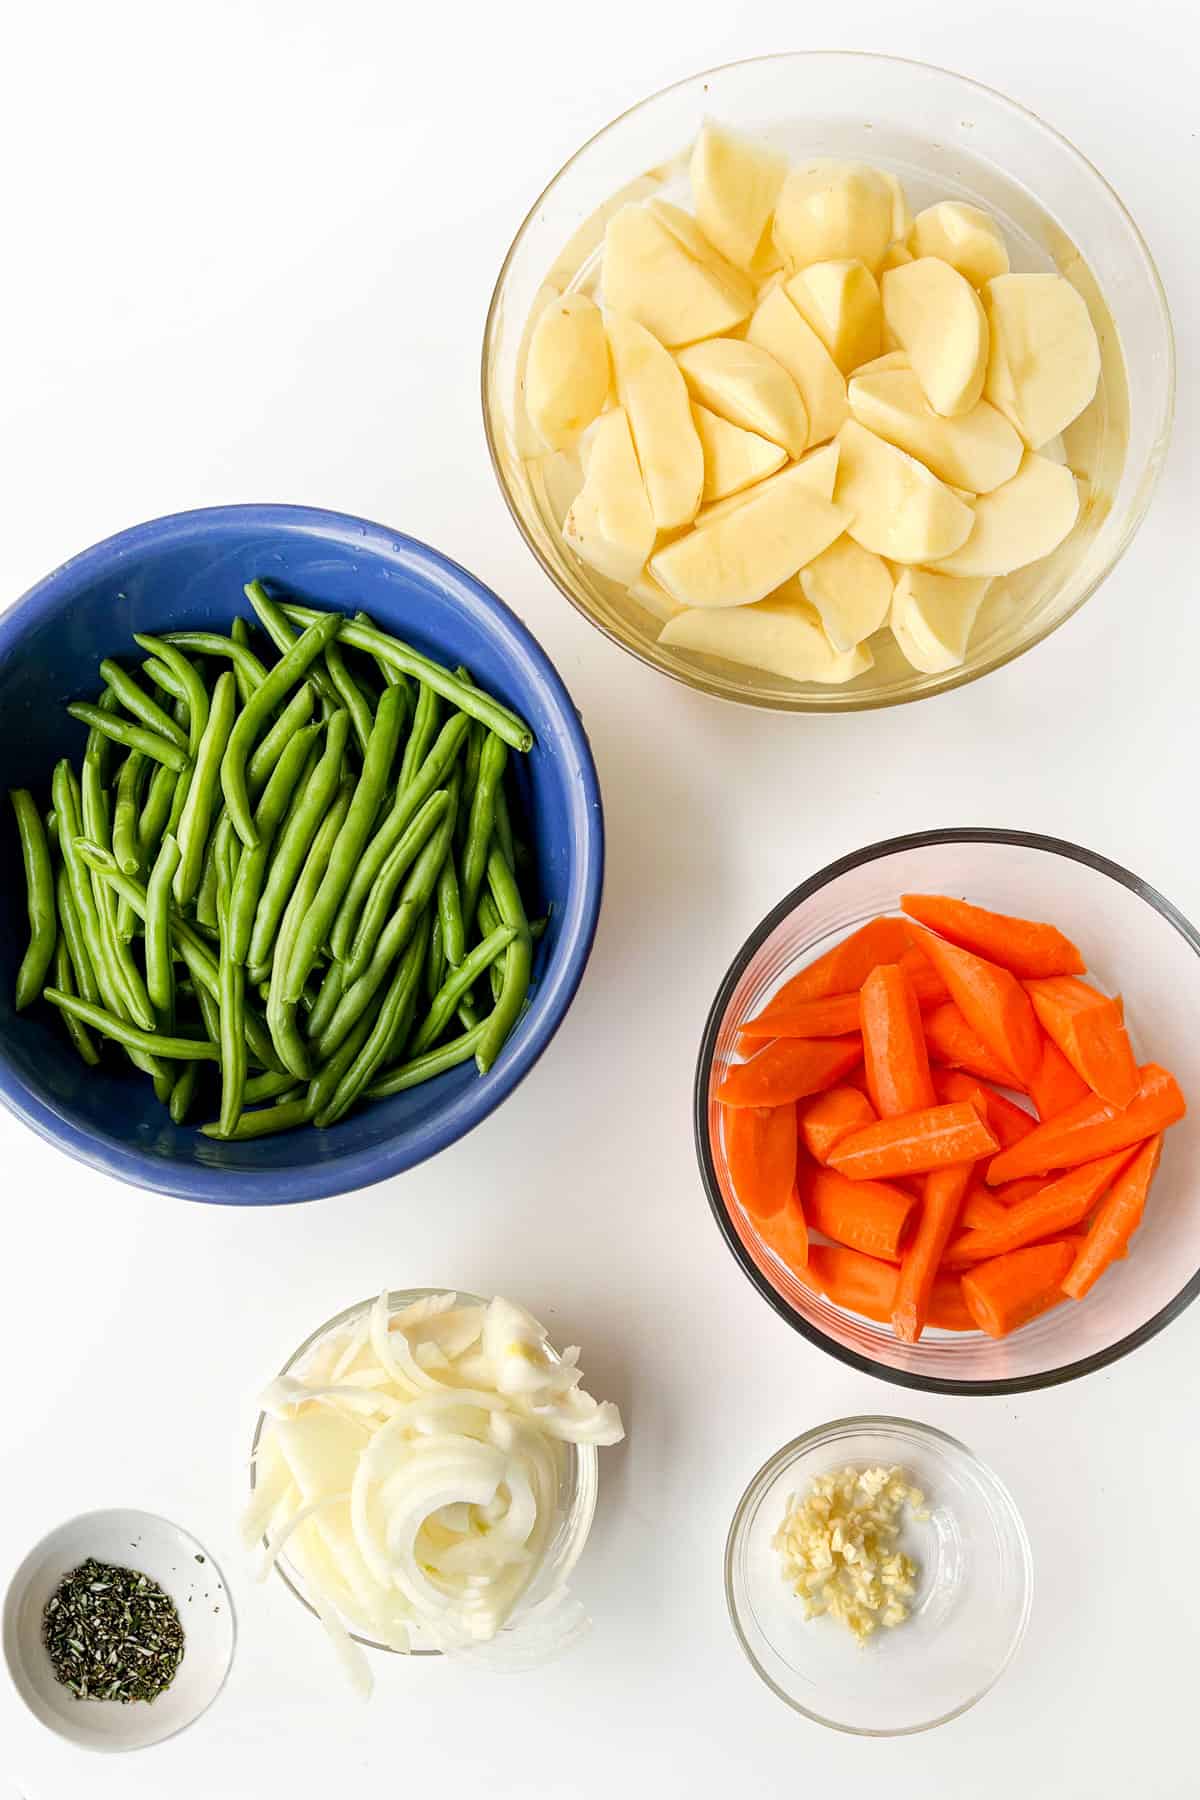 Glass bowl of potato wedges soaking in water, glass bowl of carrot wedges, small glass bowl of sliced onions, small glass bowl of chipped garlic, tiny bowl of finely chopped rosemary